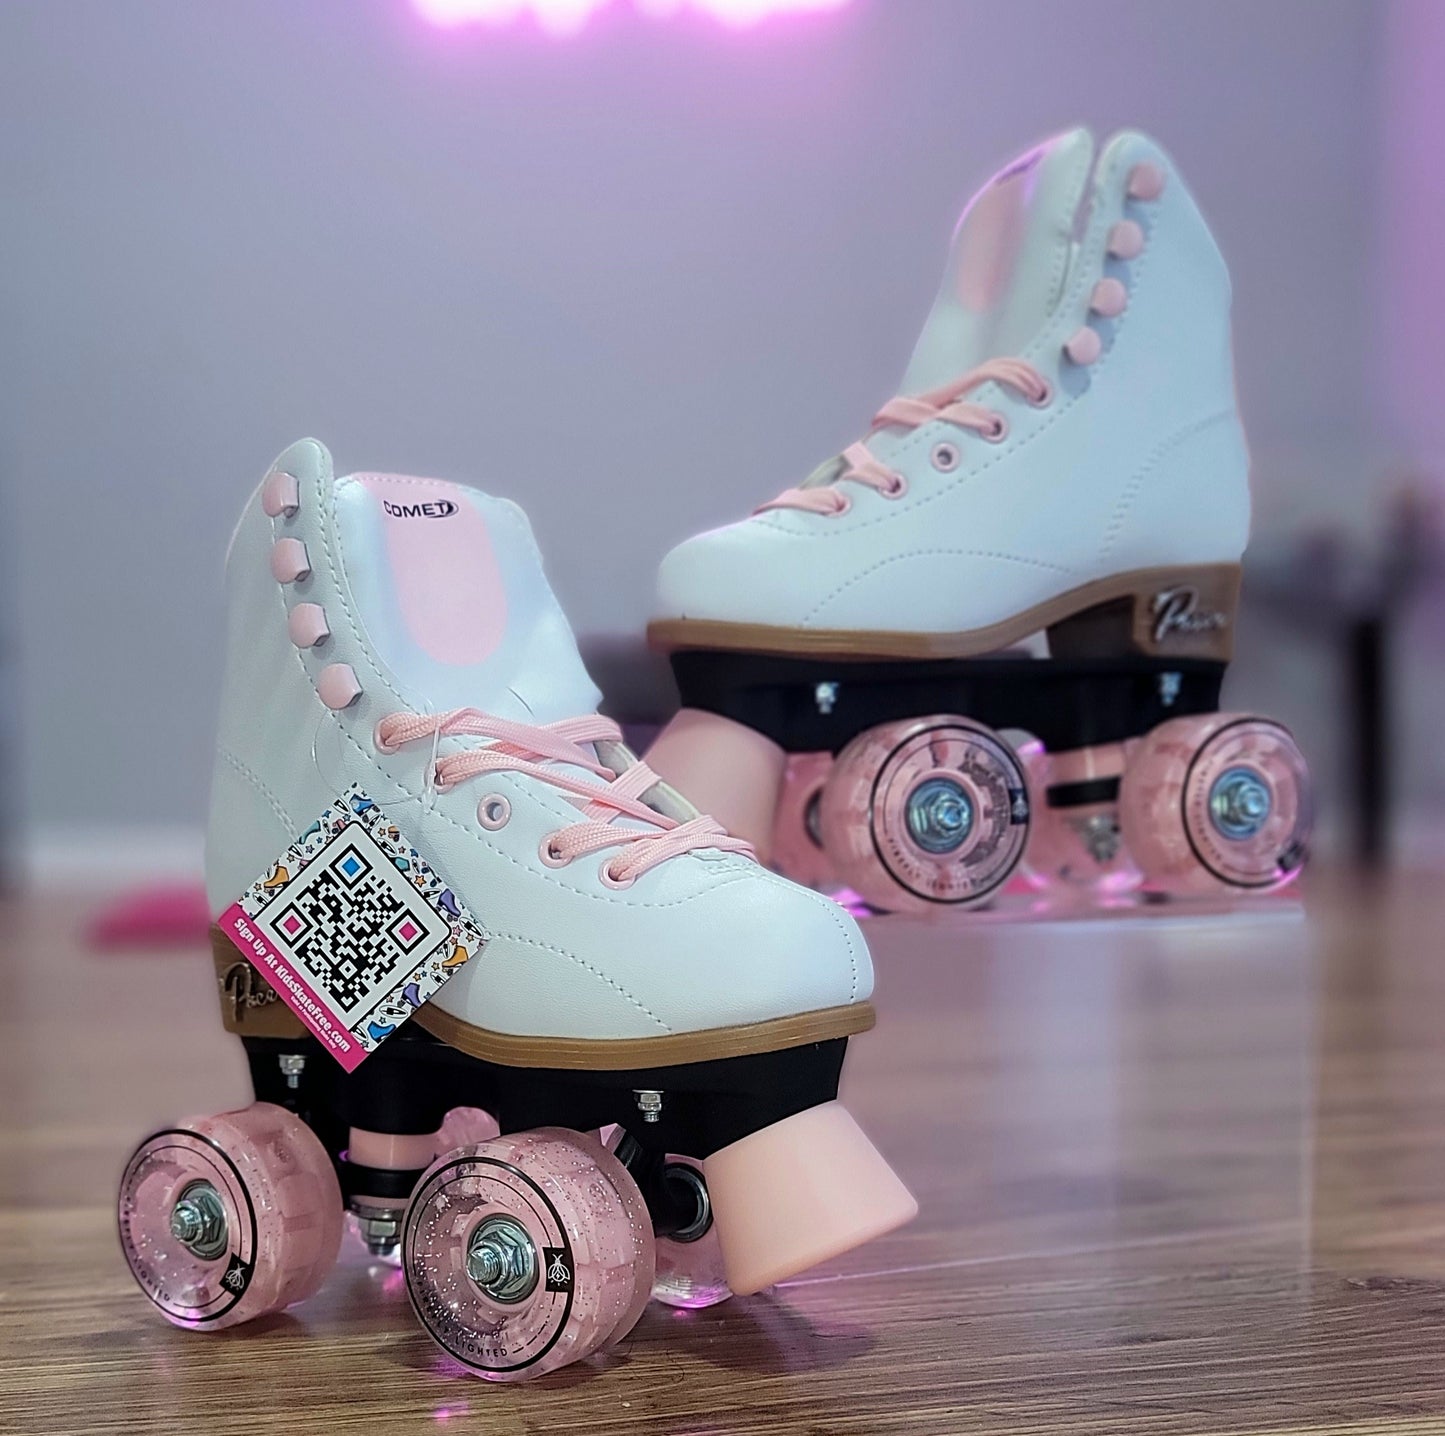 Children's Pacer Comet Youth’s Skates